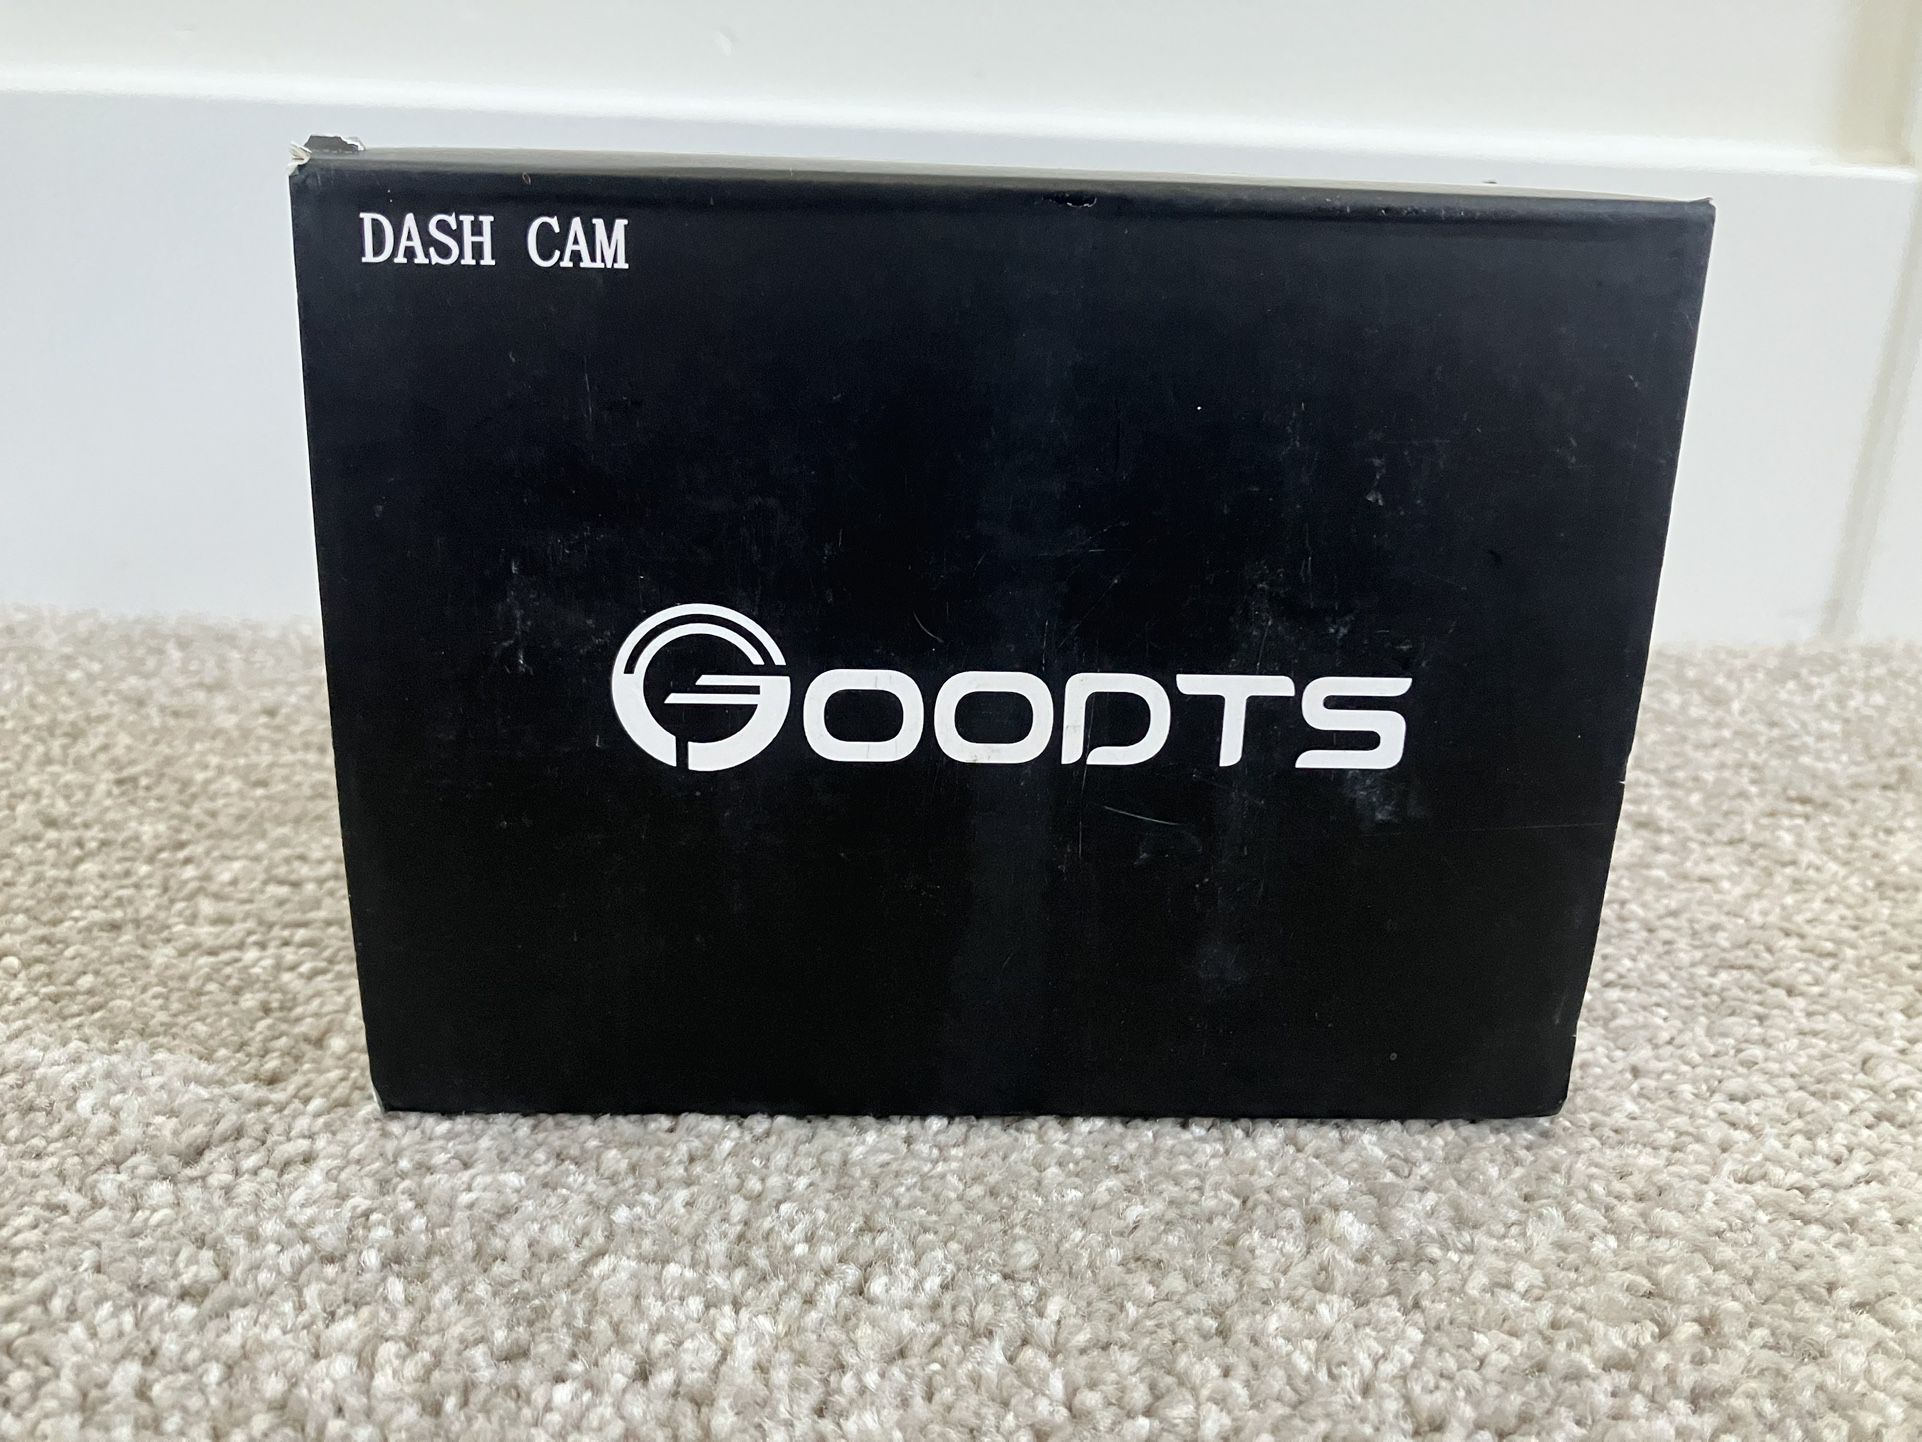 Dash Cam for Sale in St. George, UT - OfferUp